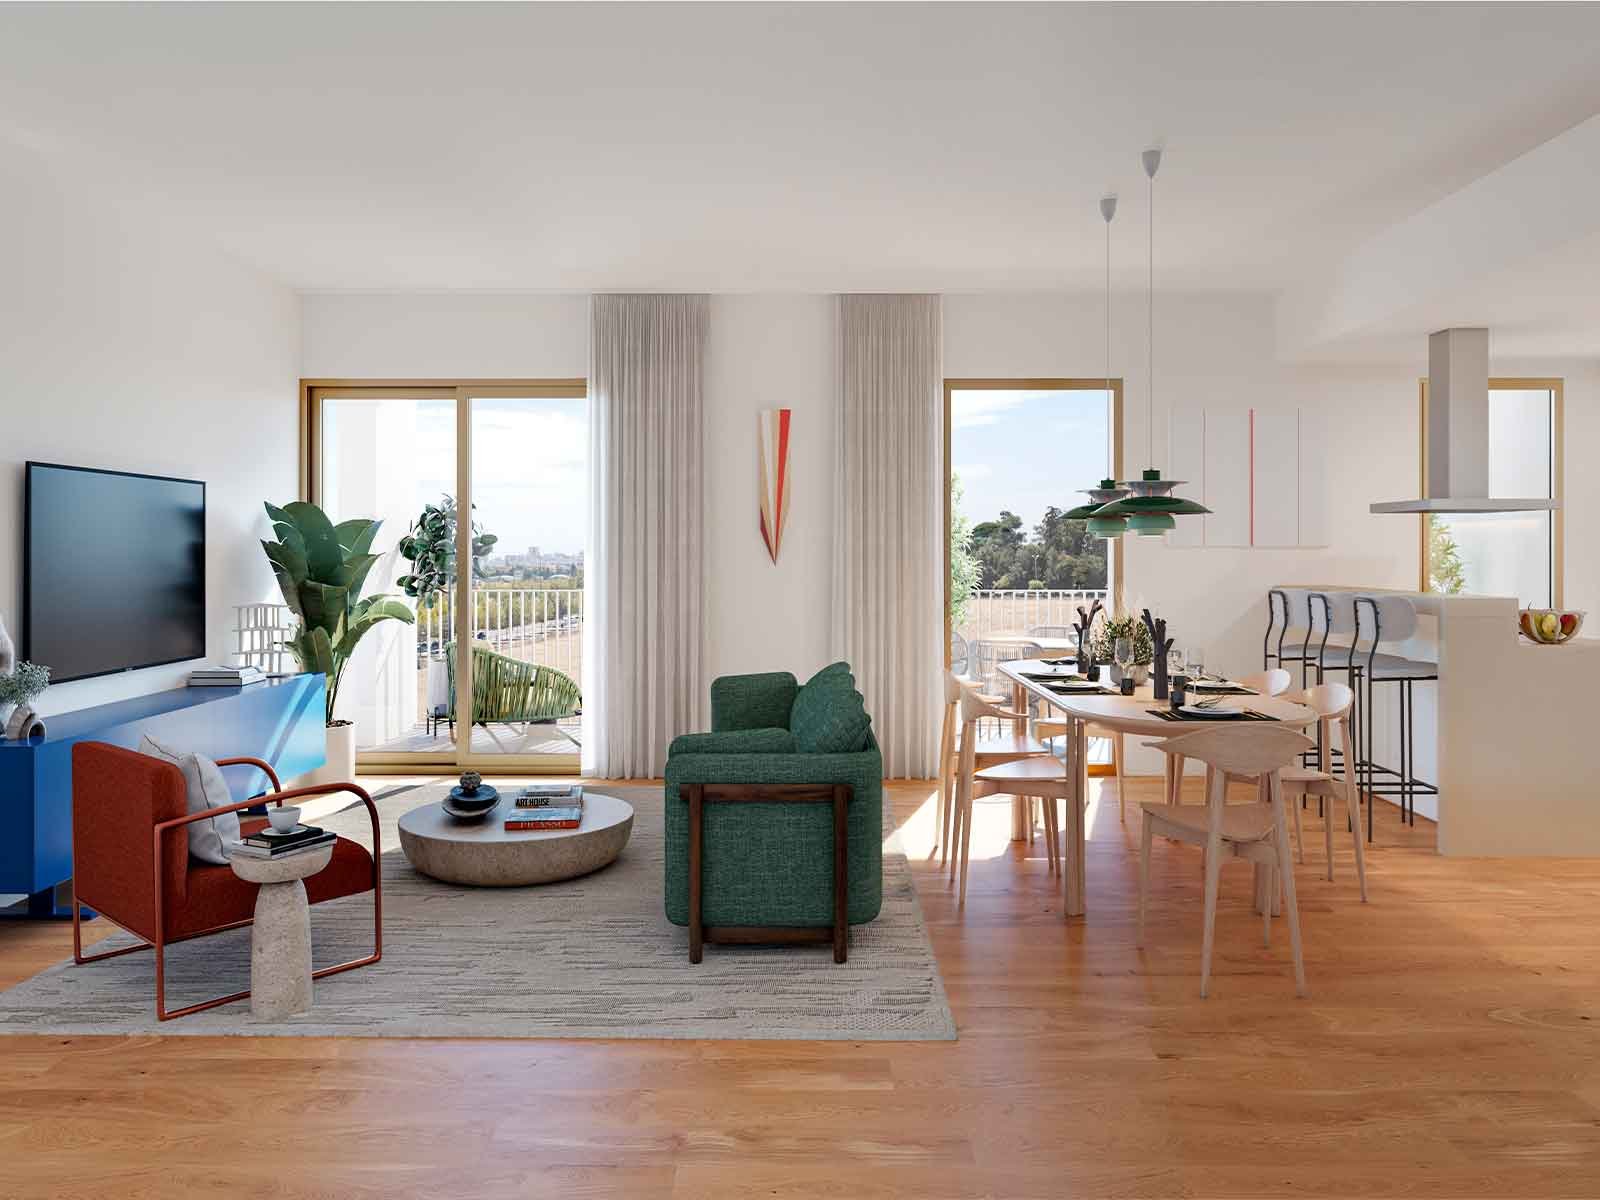 3 bedroom apartment with balcony and parking in new development Lisbon